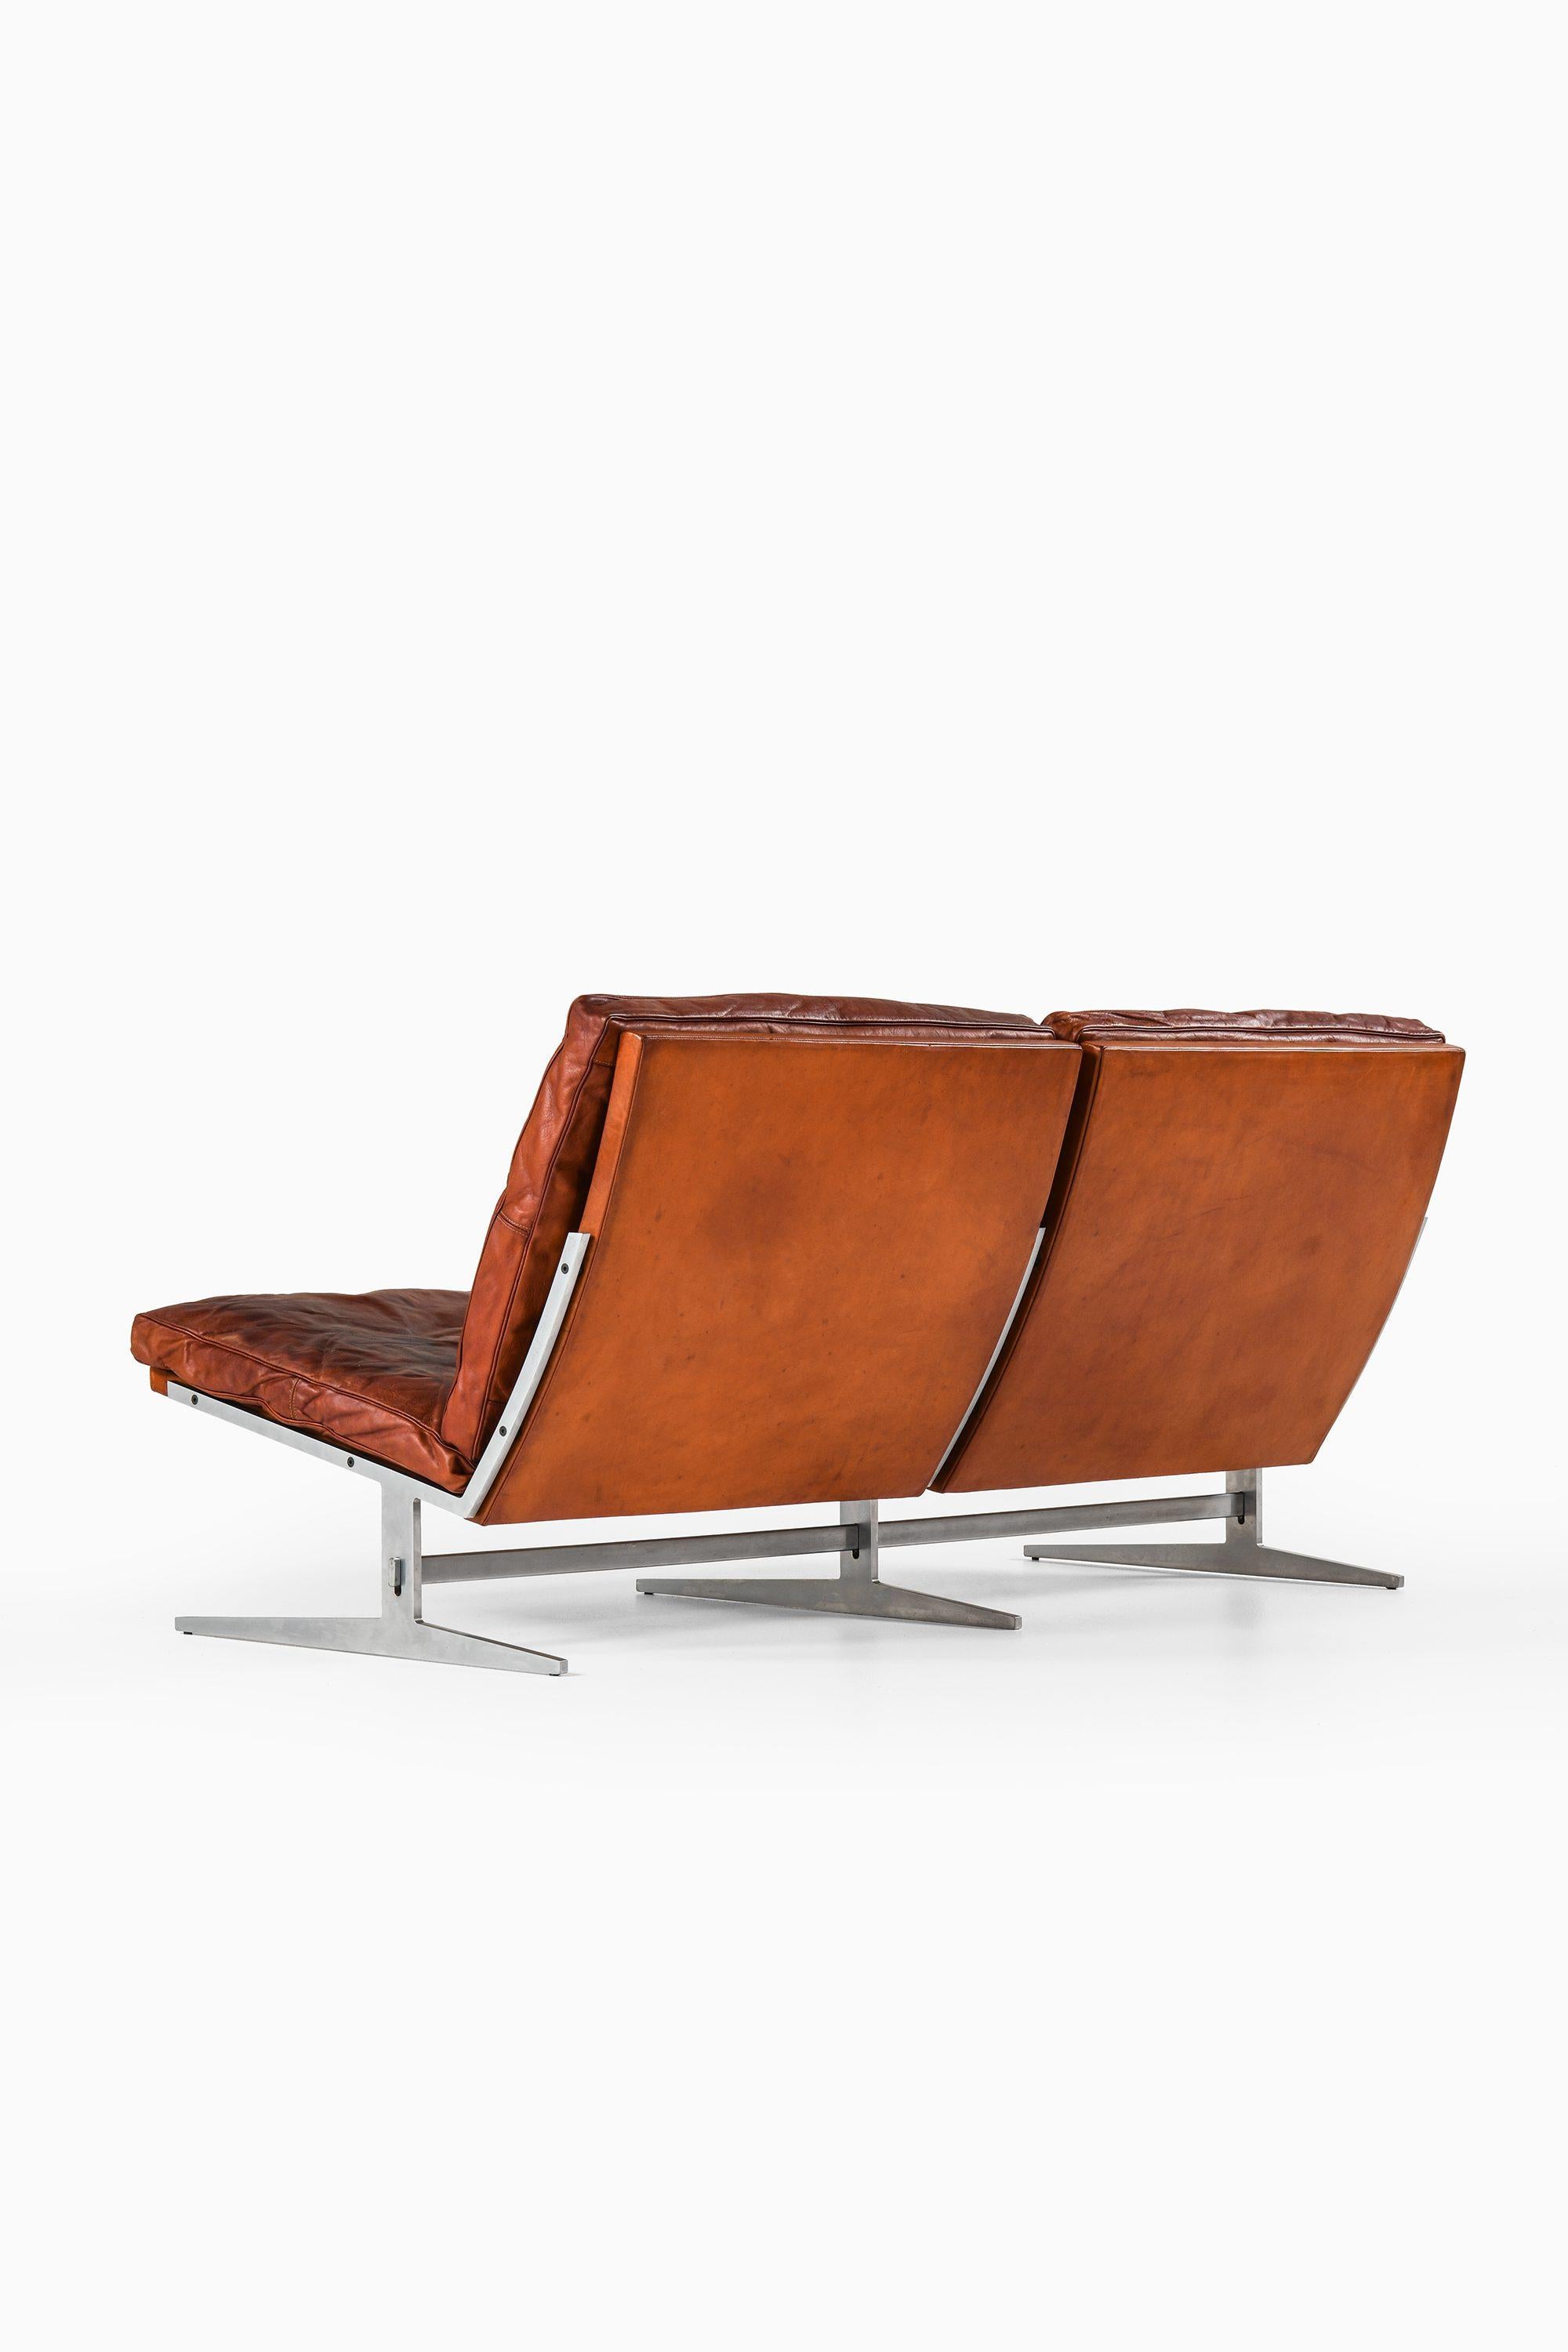 Danish Two Seater Sofa in Steel & Leather by Jørgen Kastholm & Preben Fabricius, 1960's